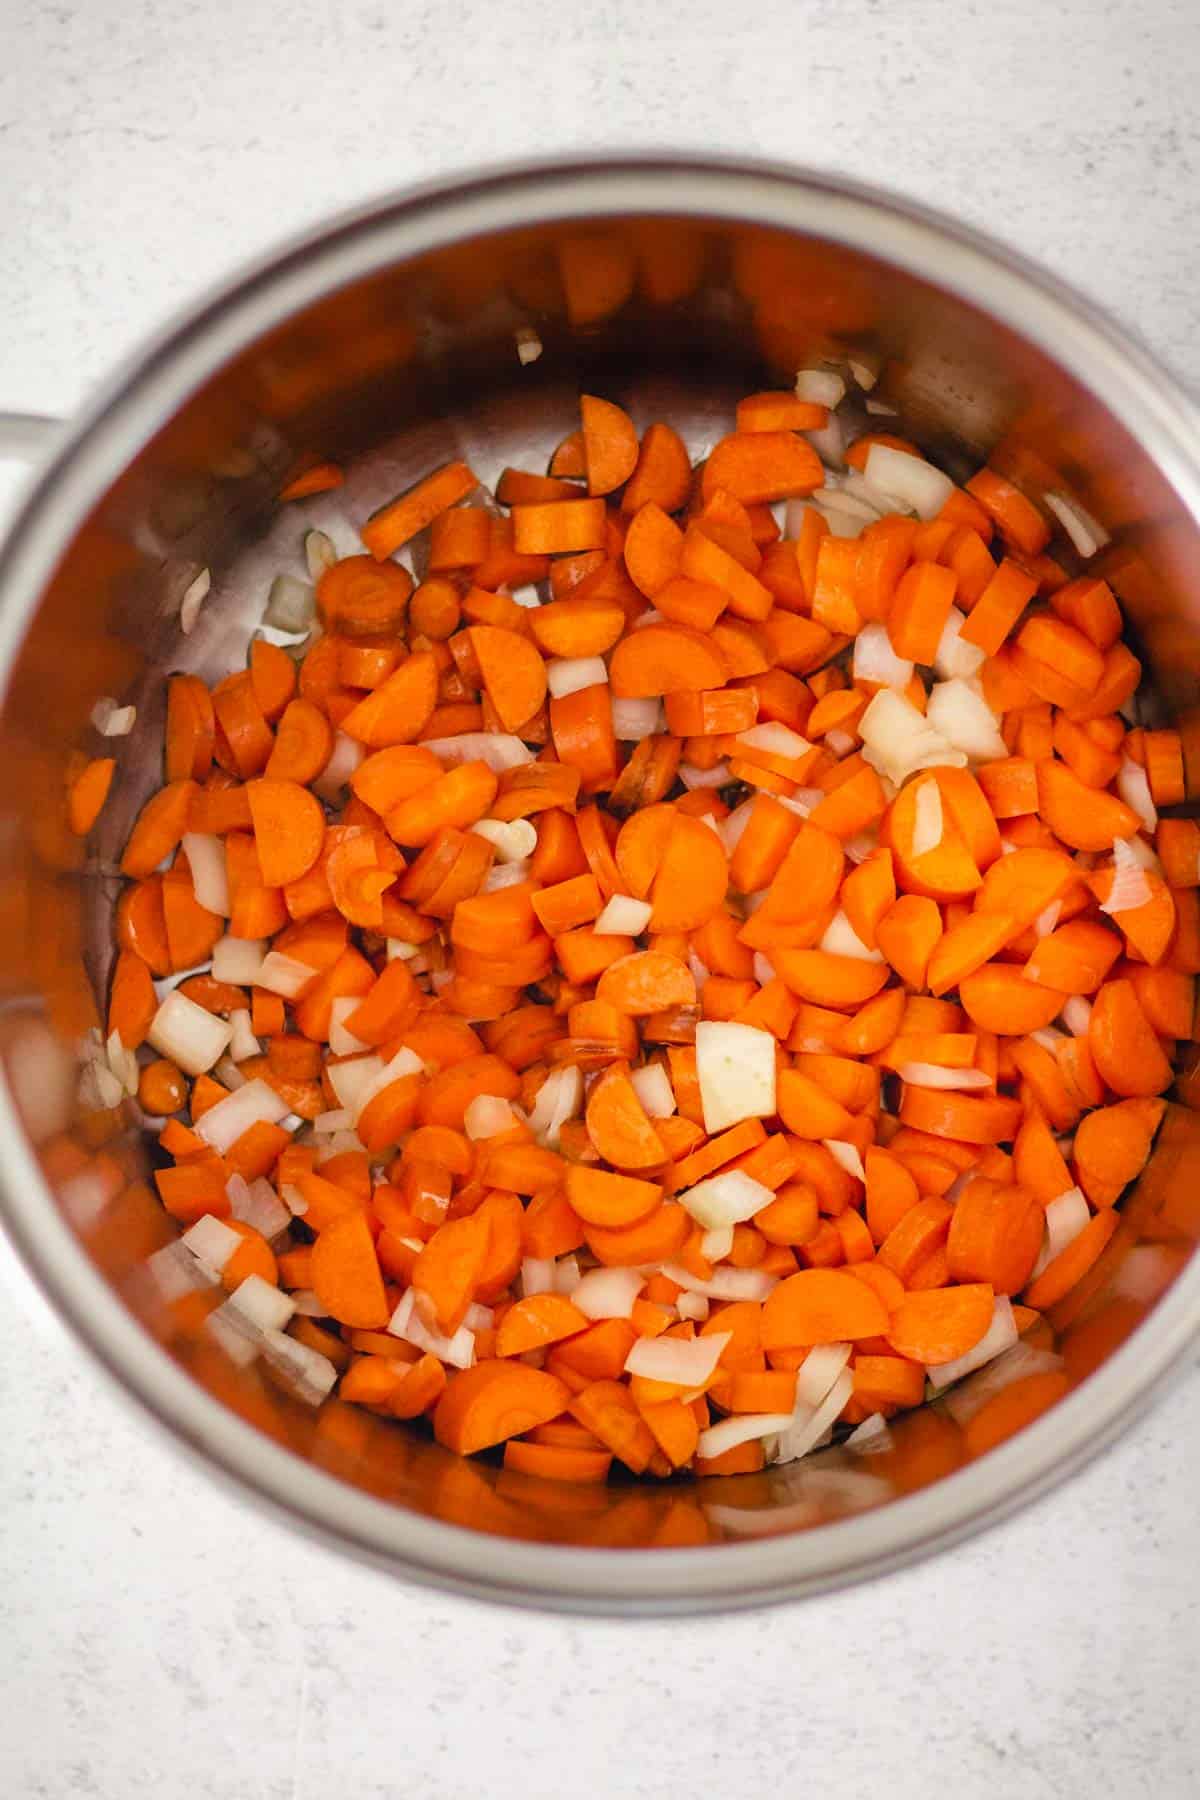 Diced onion and carrots cooking in a large stock pot.